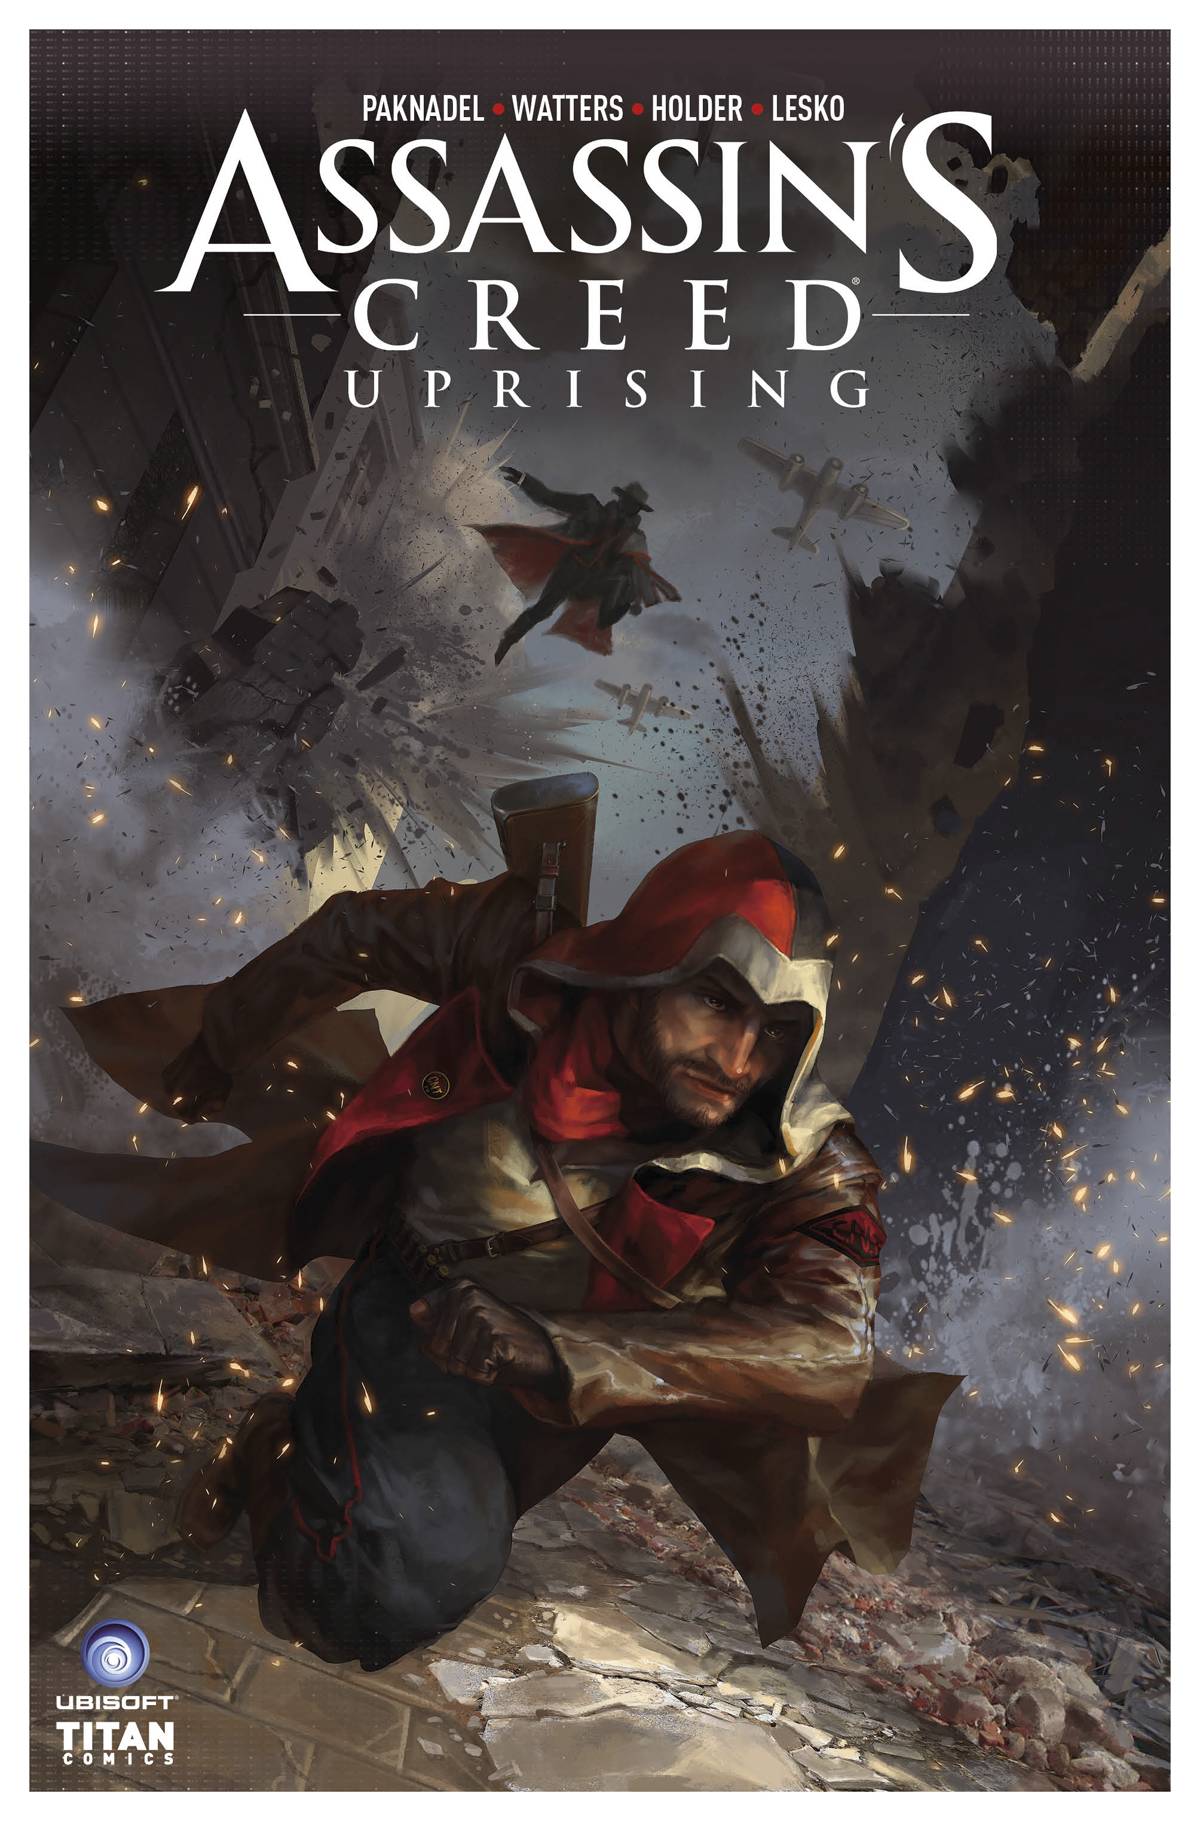 Assassins Creed Uprising #7 Cover A Sunsetagain